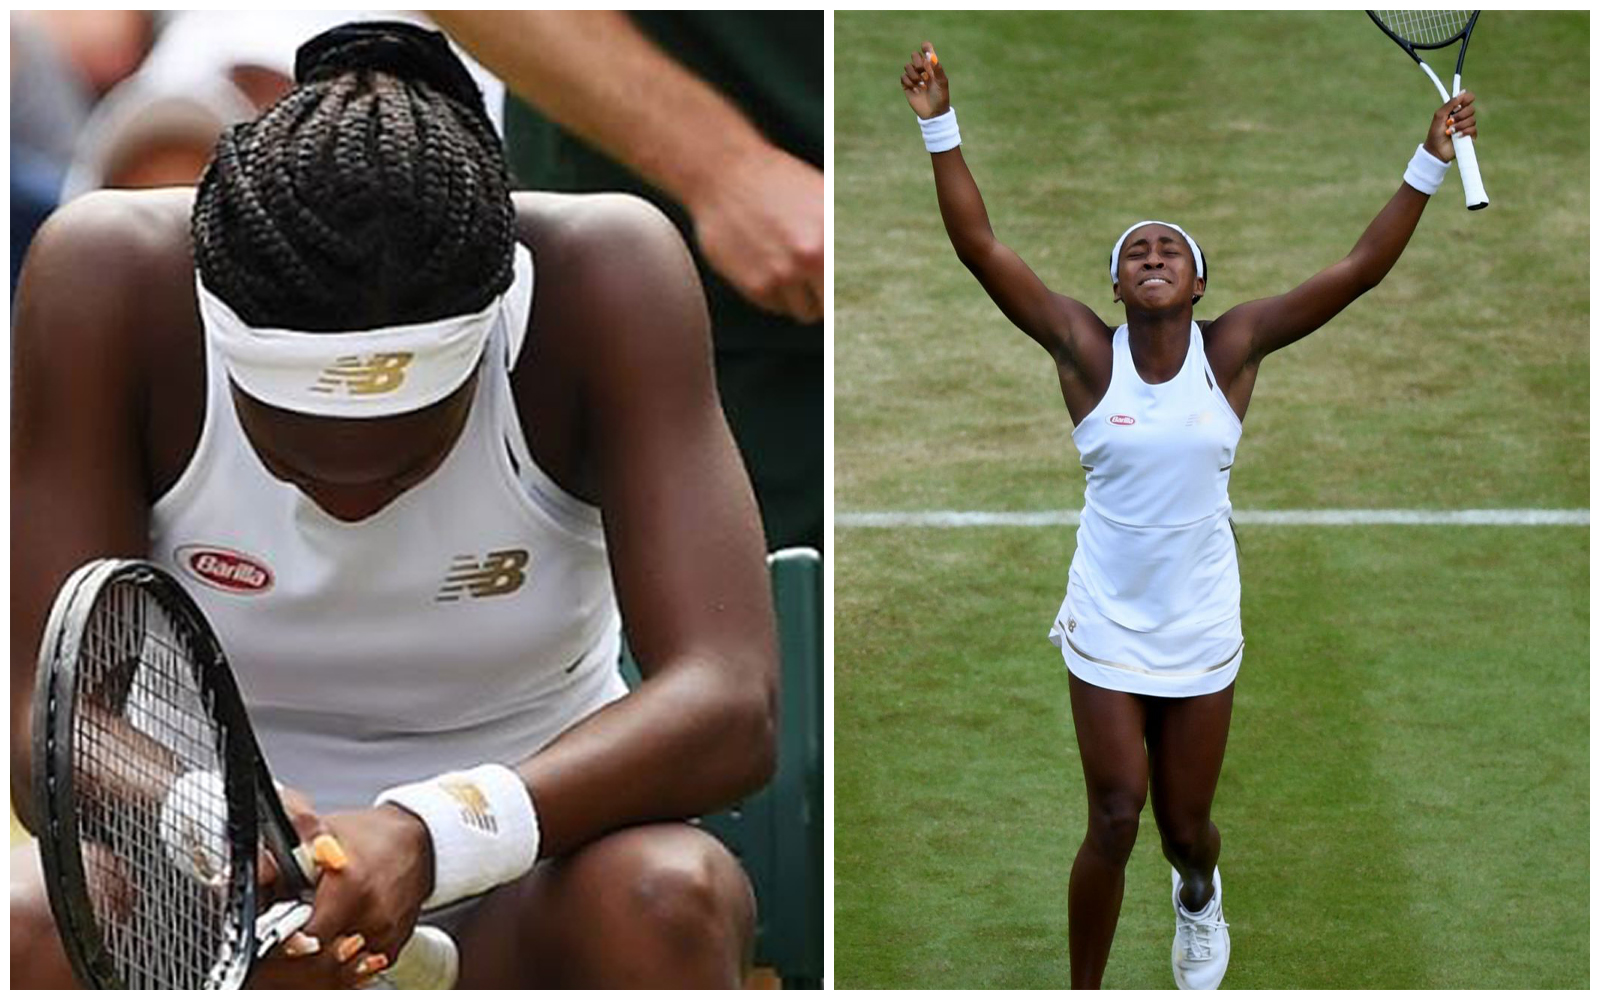 Coco Gauff, The 15-Year-Old Tennis Prodigy, Prays Before Every Match